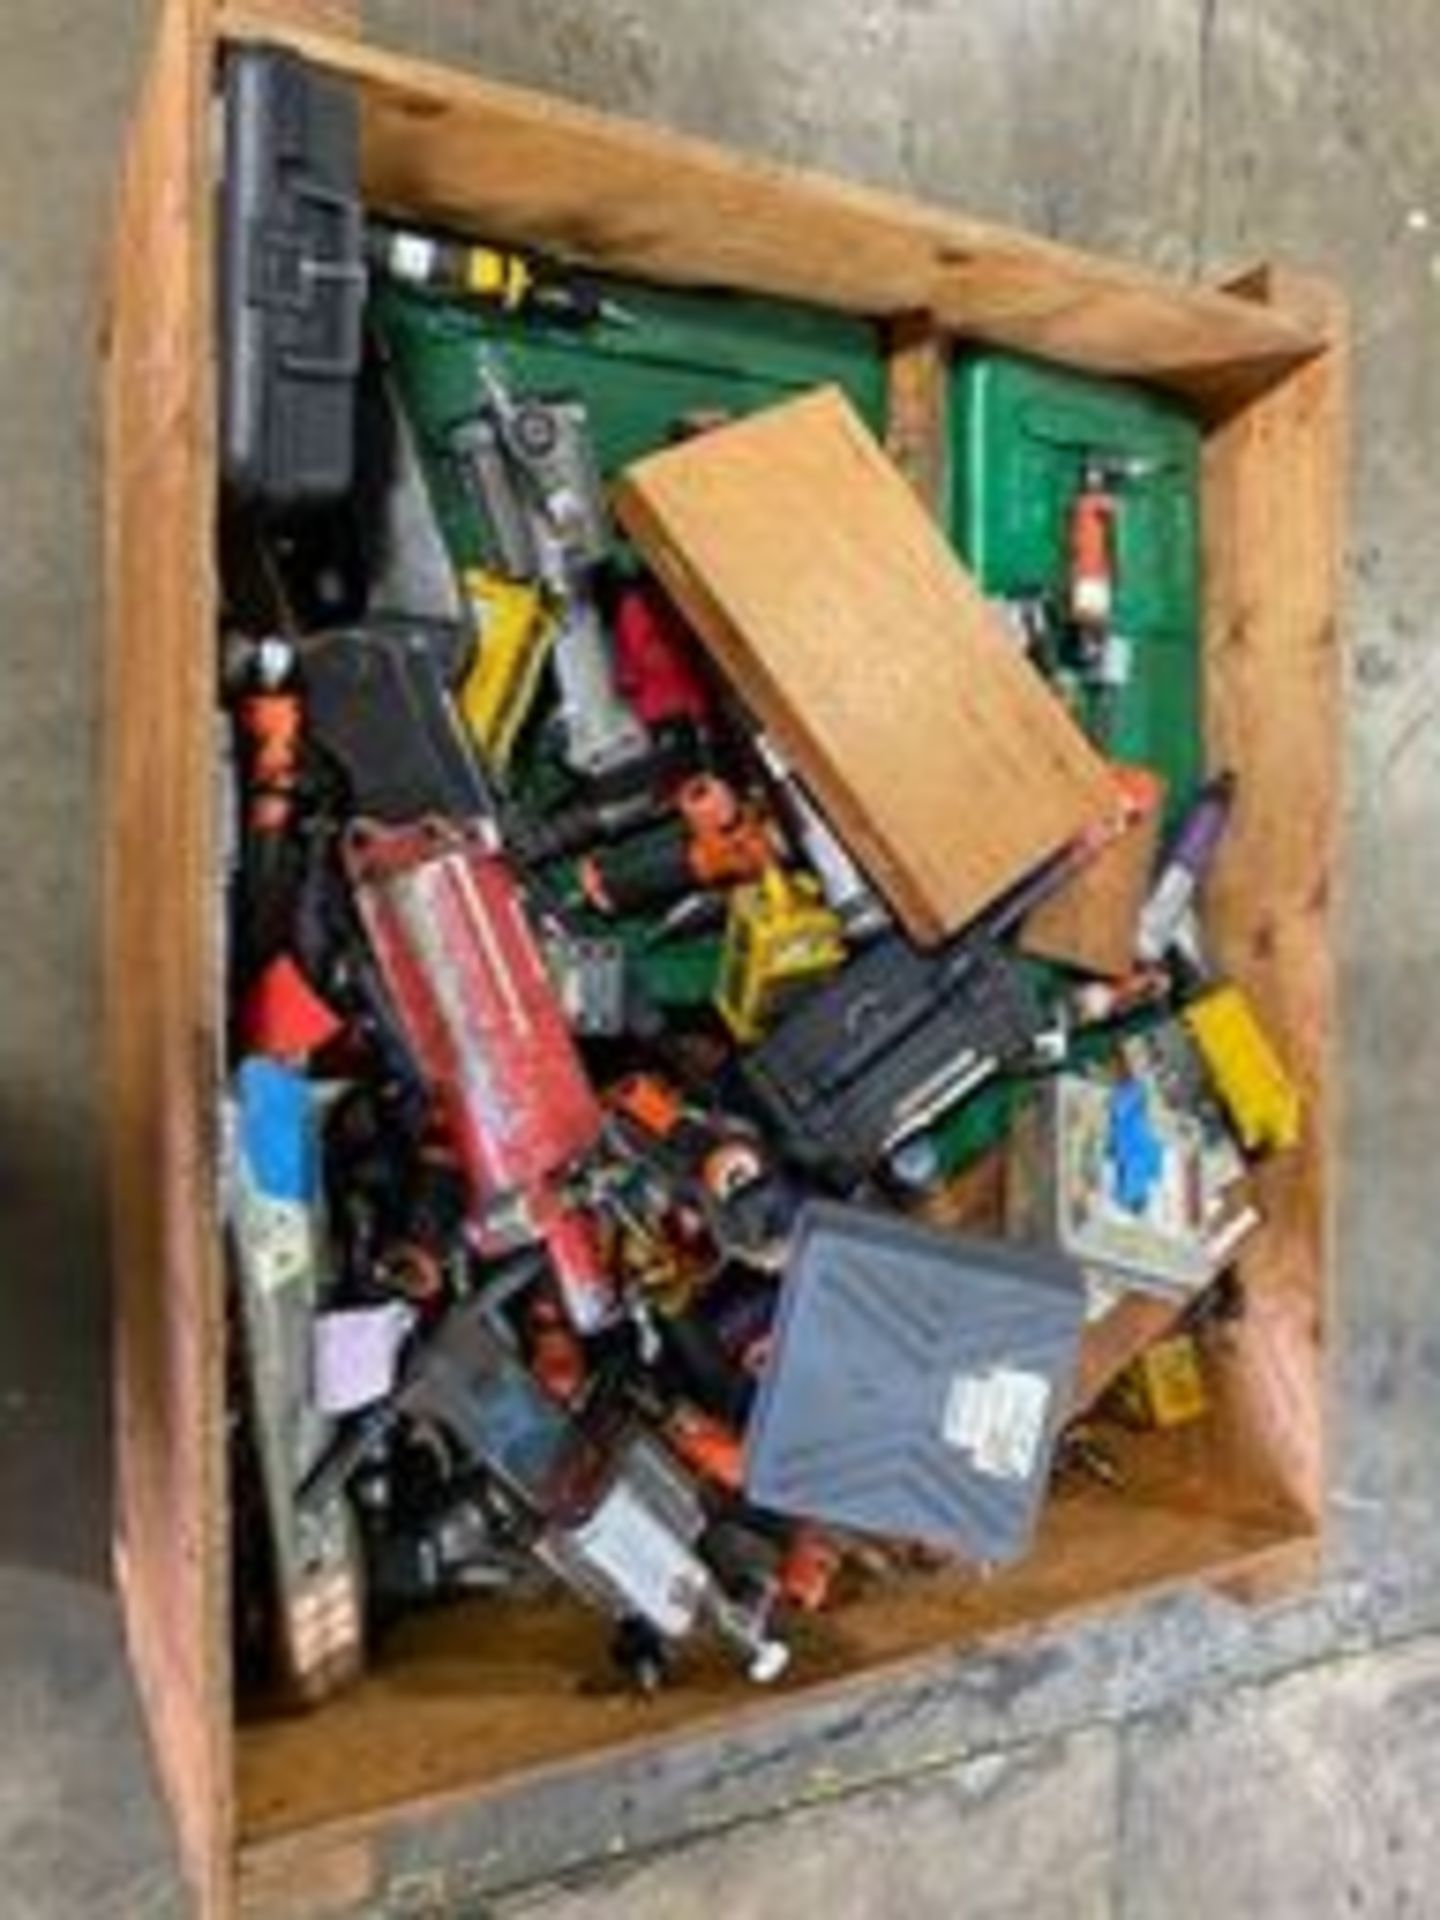 Wood Box of Aro Air Power Tools & Misc. Calibration Equipment Rigging Price: $50 - Image 3 of 3